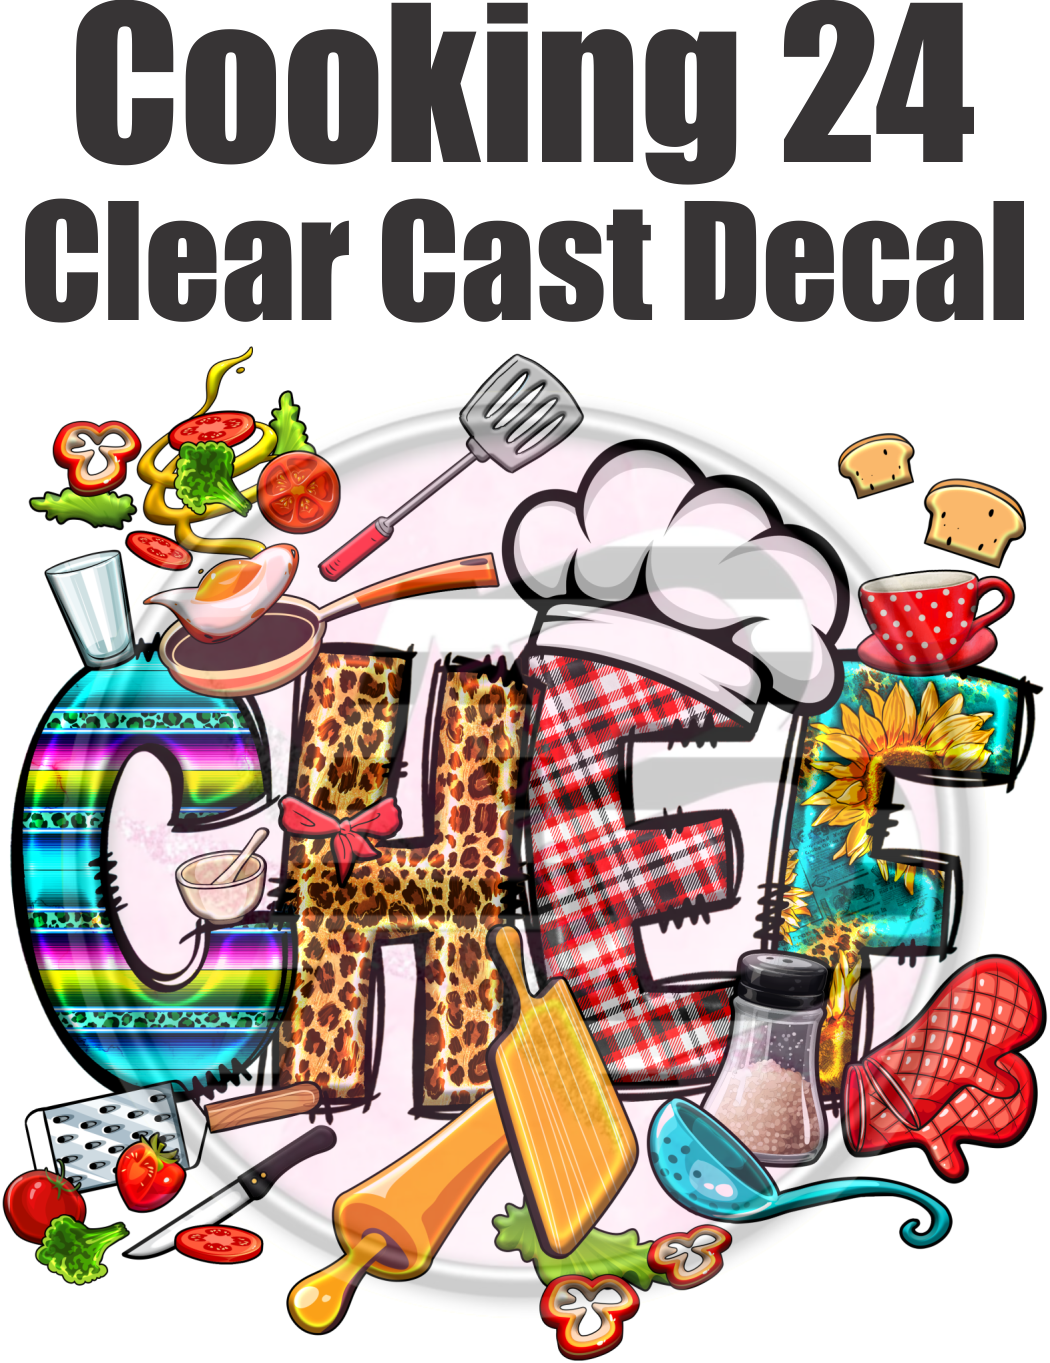 Cooking 24 - Clear Cast Decal - 172